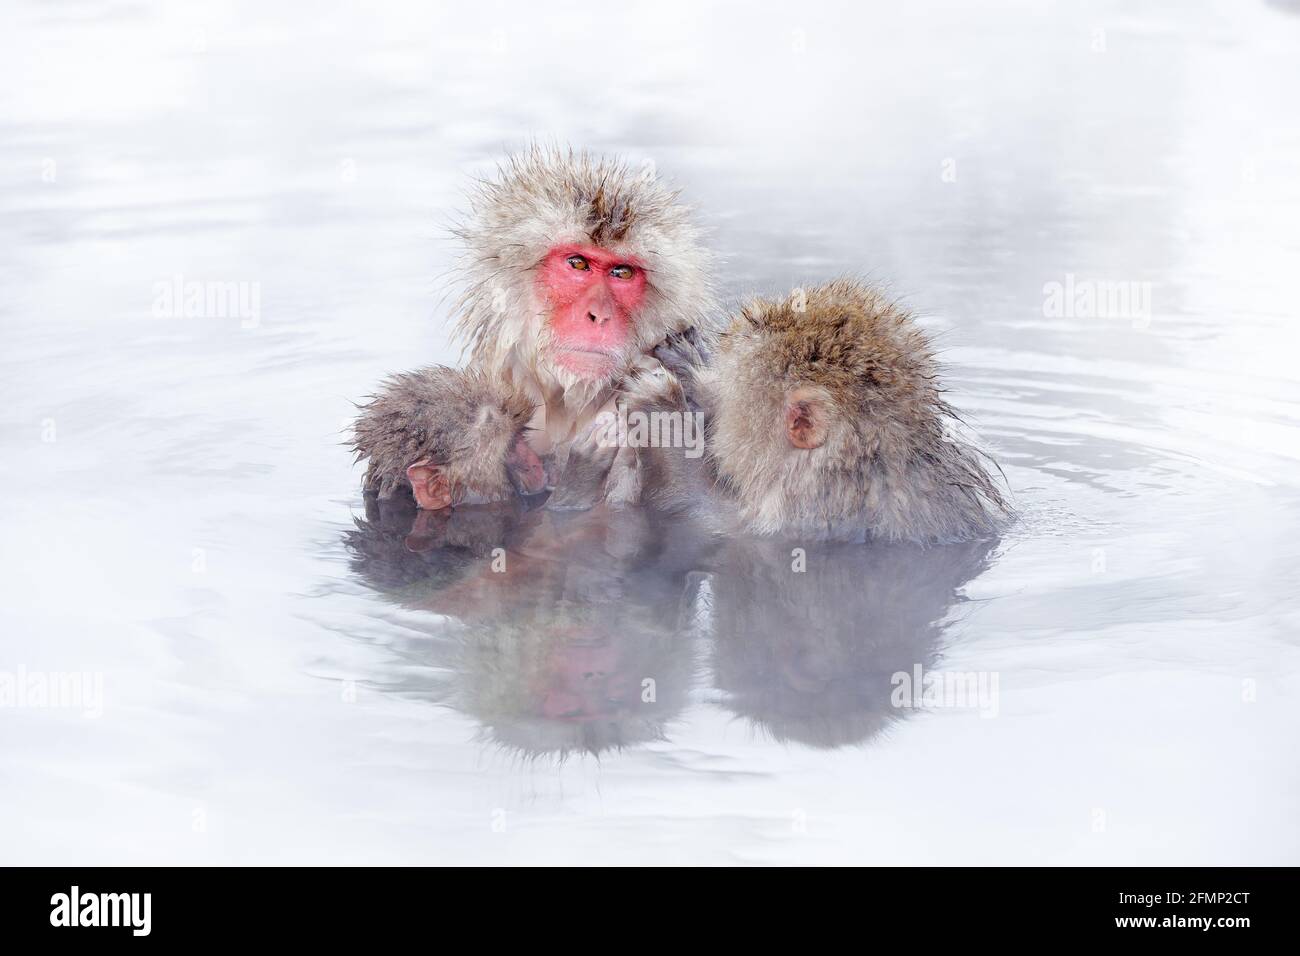 Family in the spa water Monkey Japanese macaque, Macaca fuscata, red face  portrait in the cold water with fog, animal in the nature habitat, Hokkaido  Stock Photo - Alamy